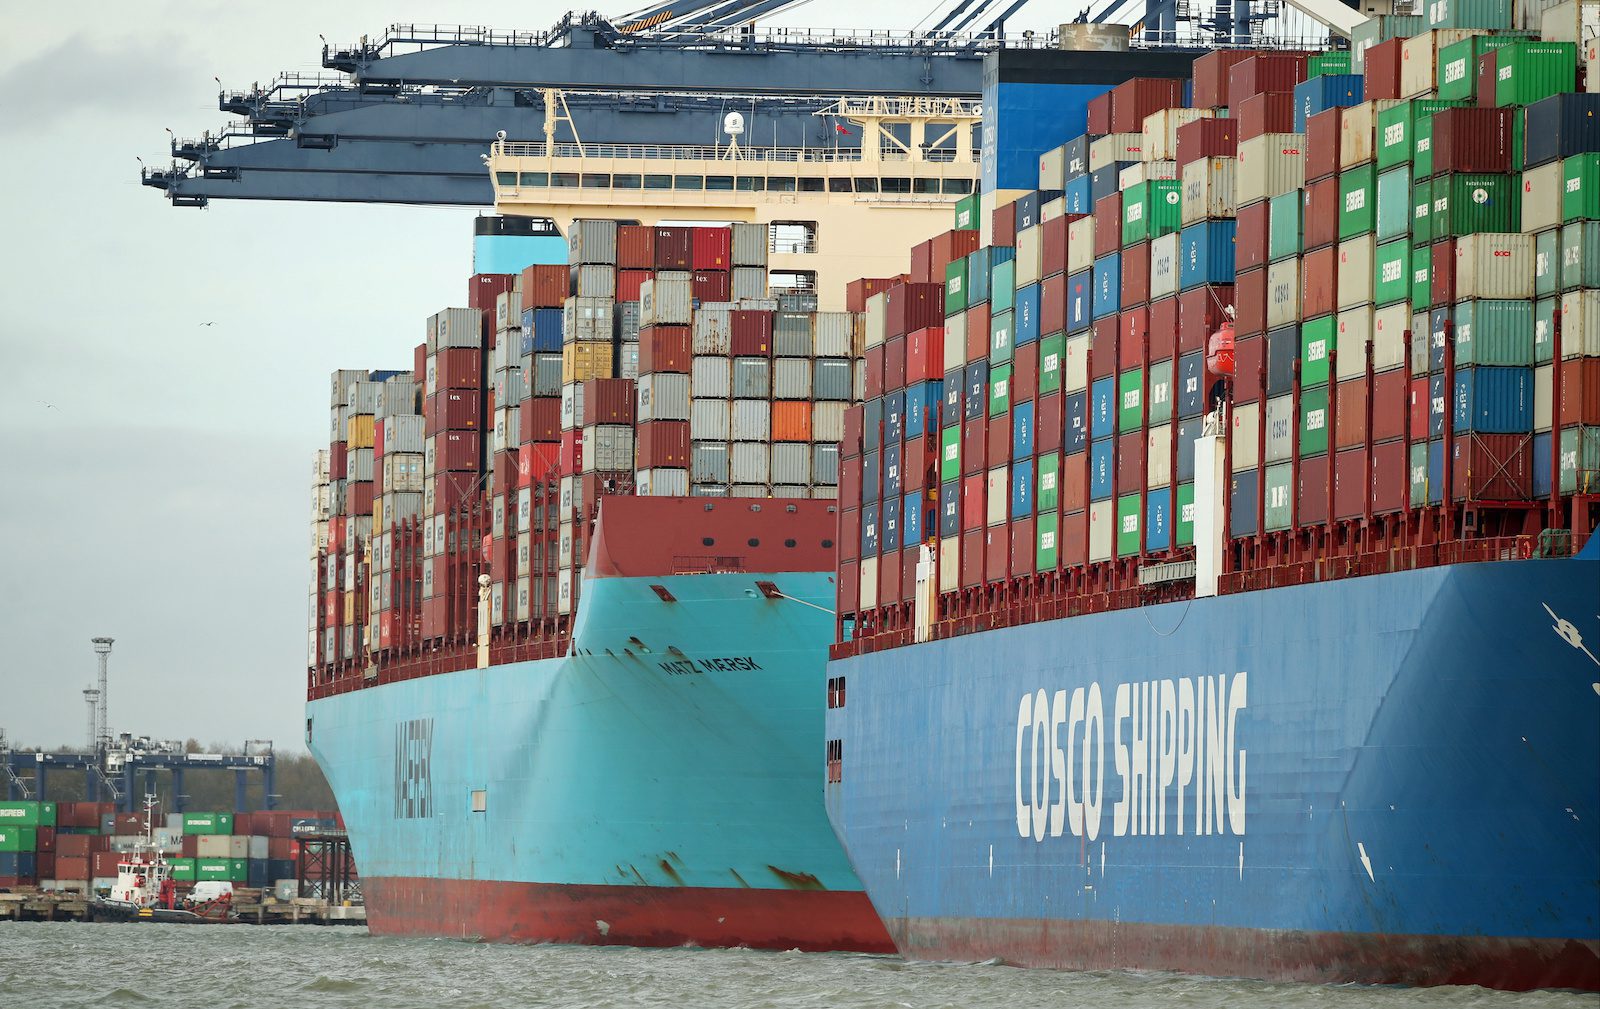 Container Shipping Had Its Best Quarter in History Last Year. 2021 Could Be Even Better